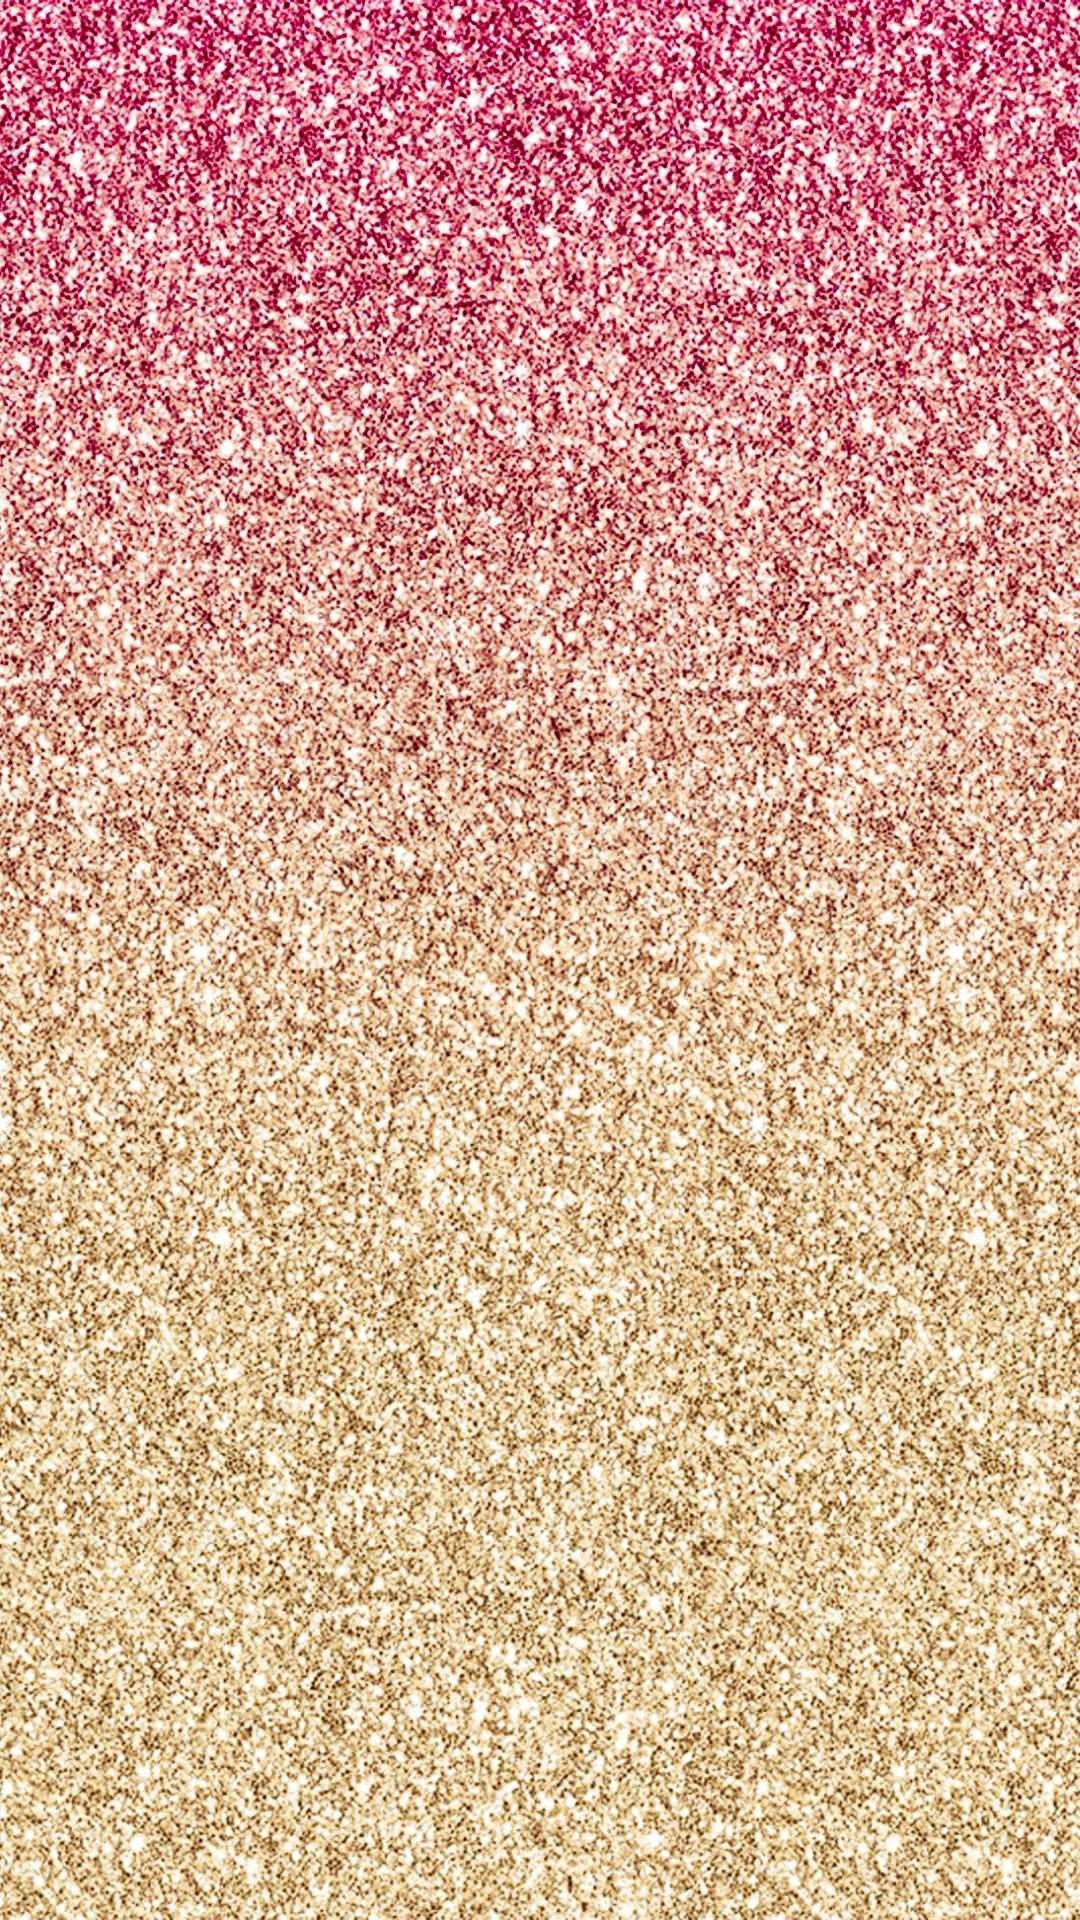 Pink And Gold Glitter Sparkle Iphone Wallpaper